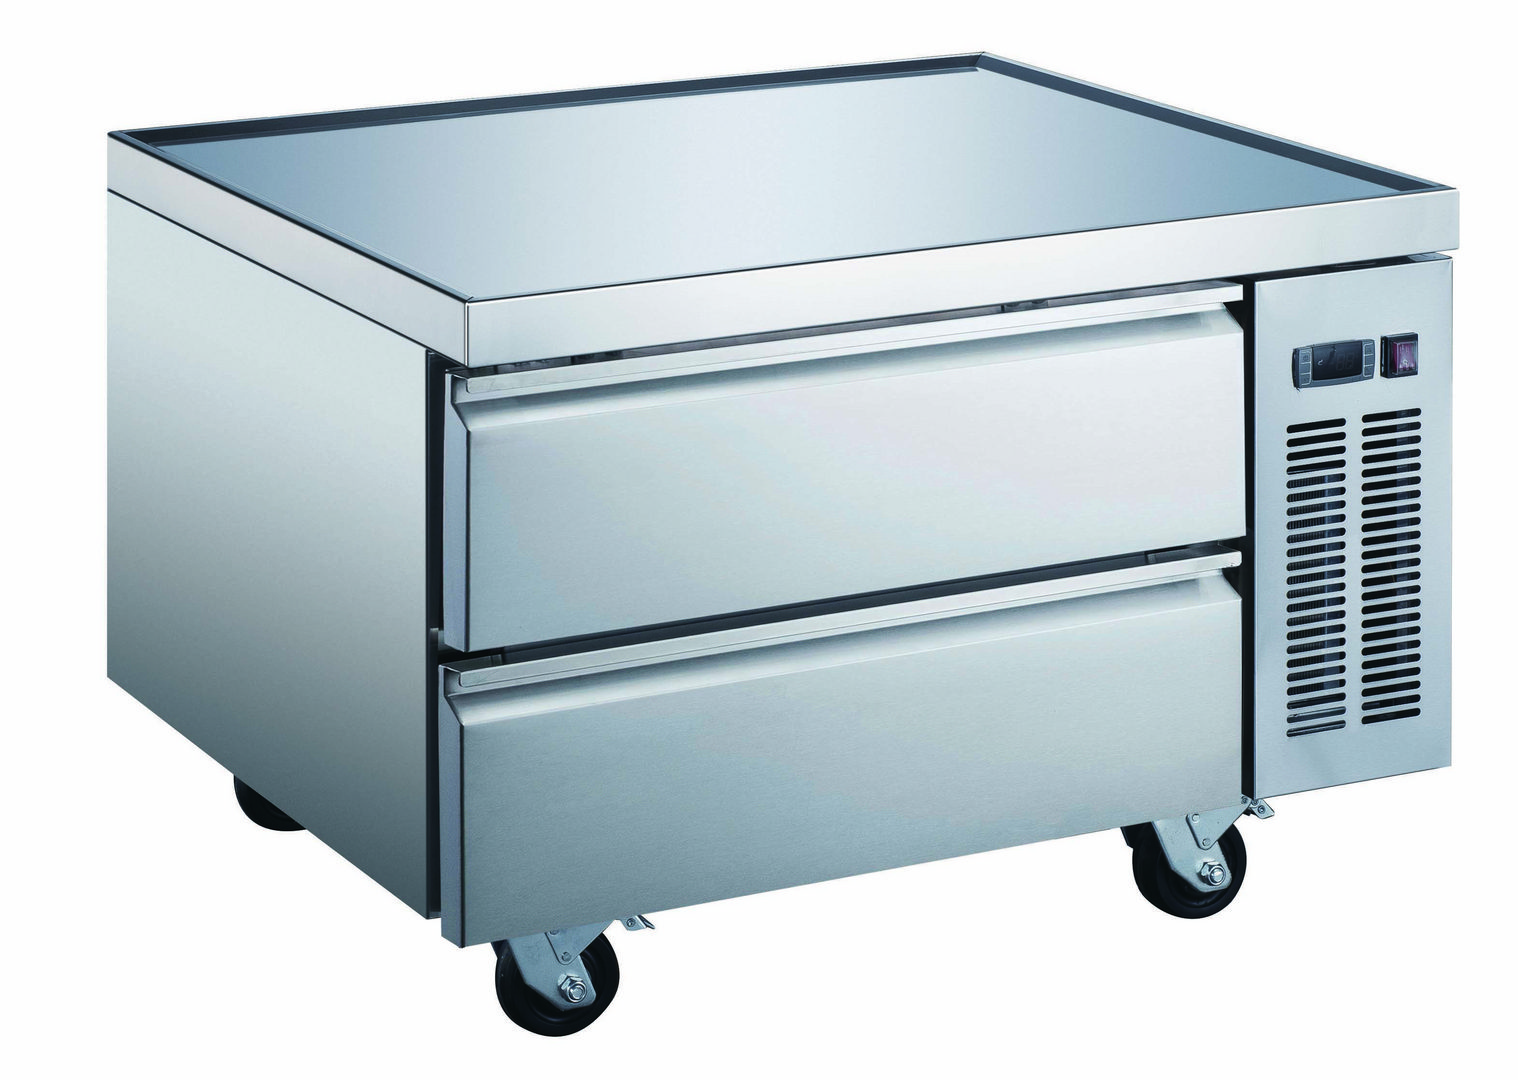 A stainless steel refrigerator with two drawers.